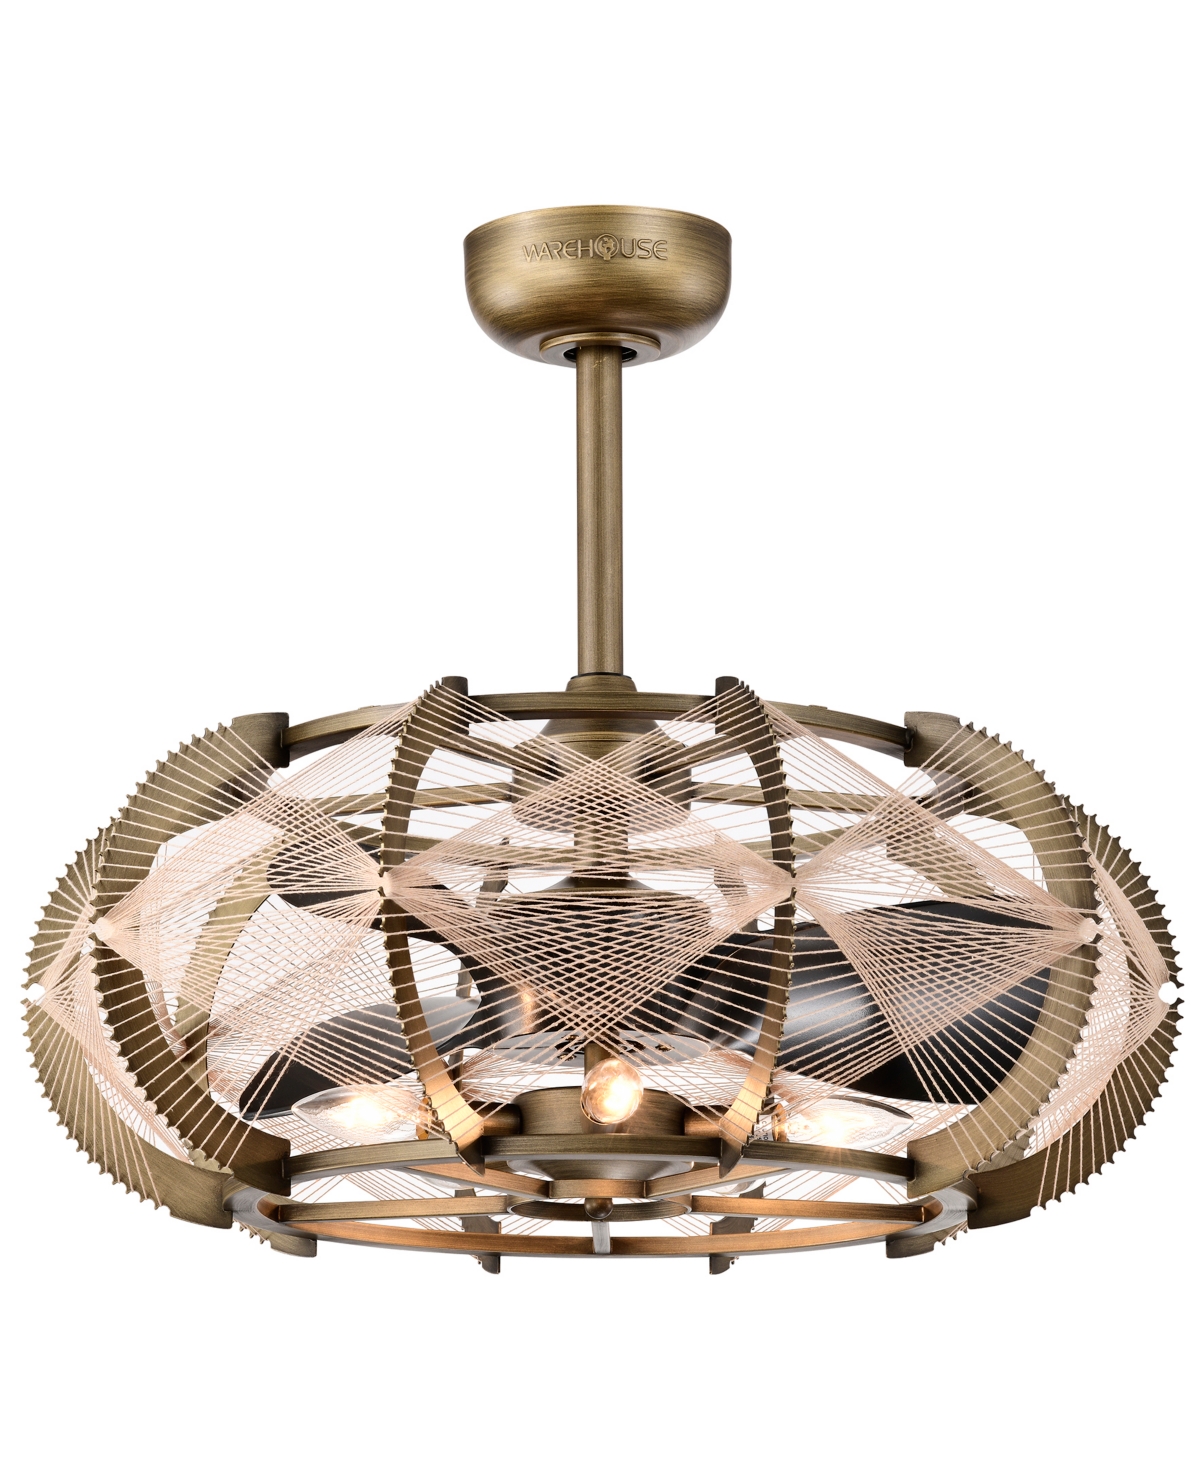 Home Accessories Xhosa 25" 5-light Indoor Finish Ceiling Fan With Light Kit In Brass